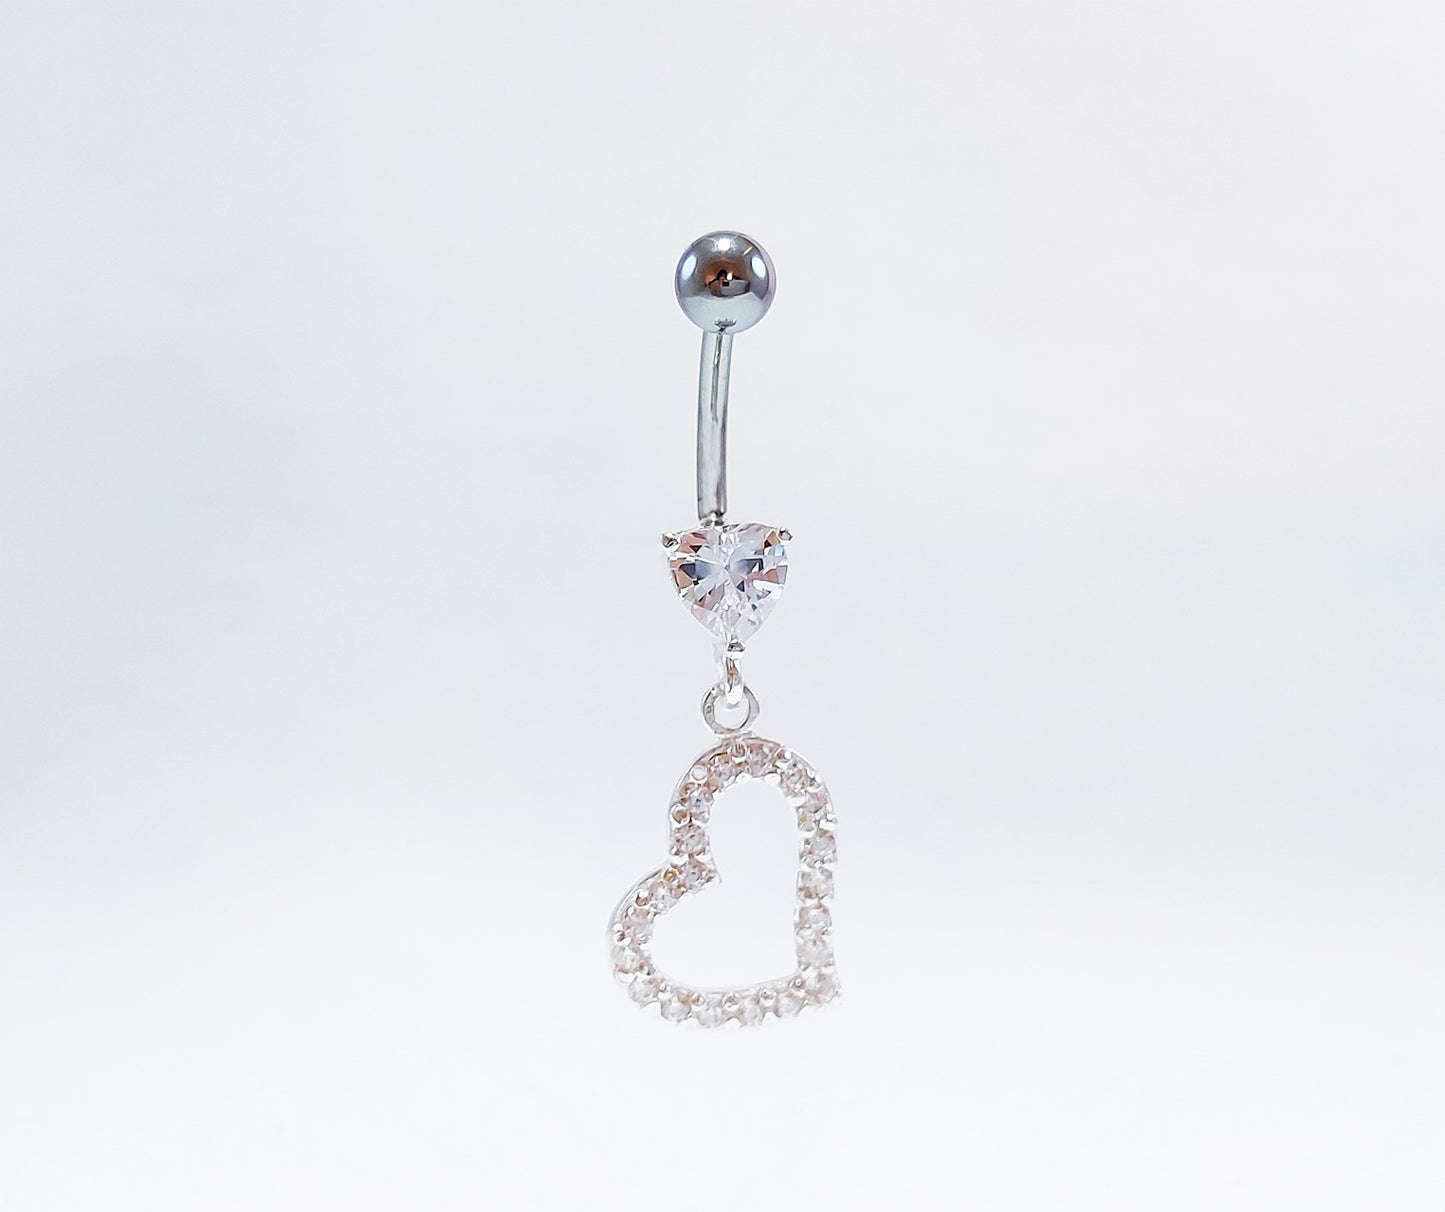 Sterling Silver Belly Ring with Cubic Zirconia Stones. Heart Design